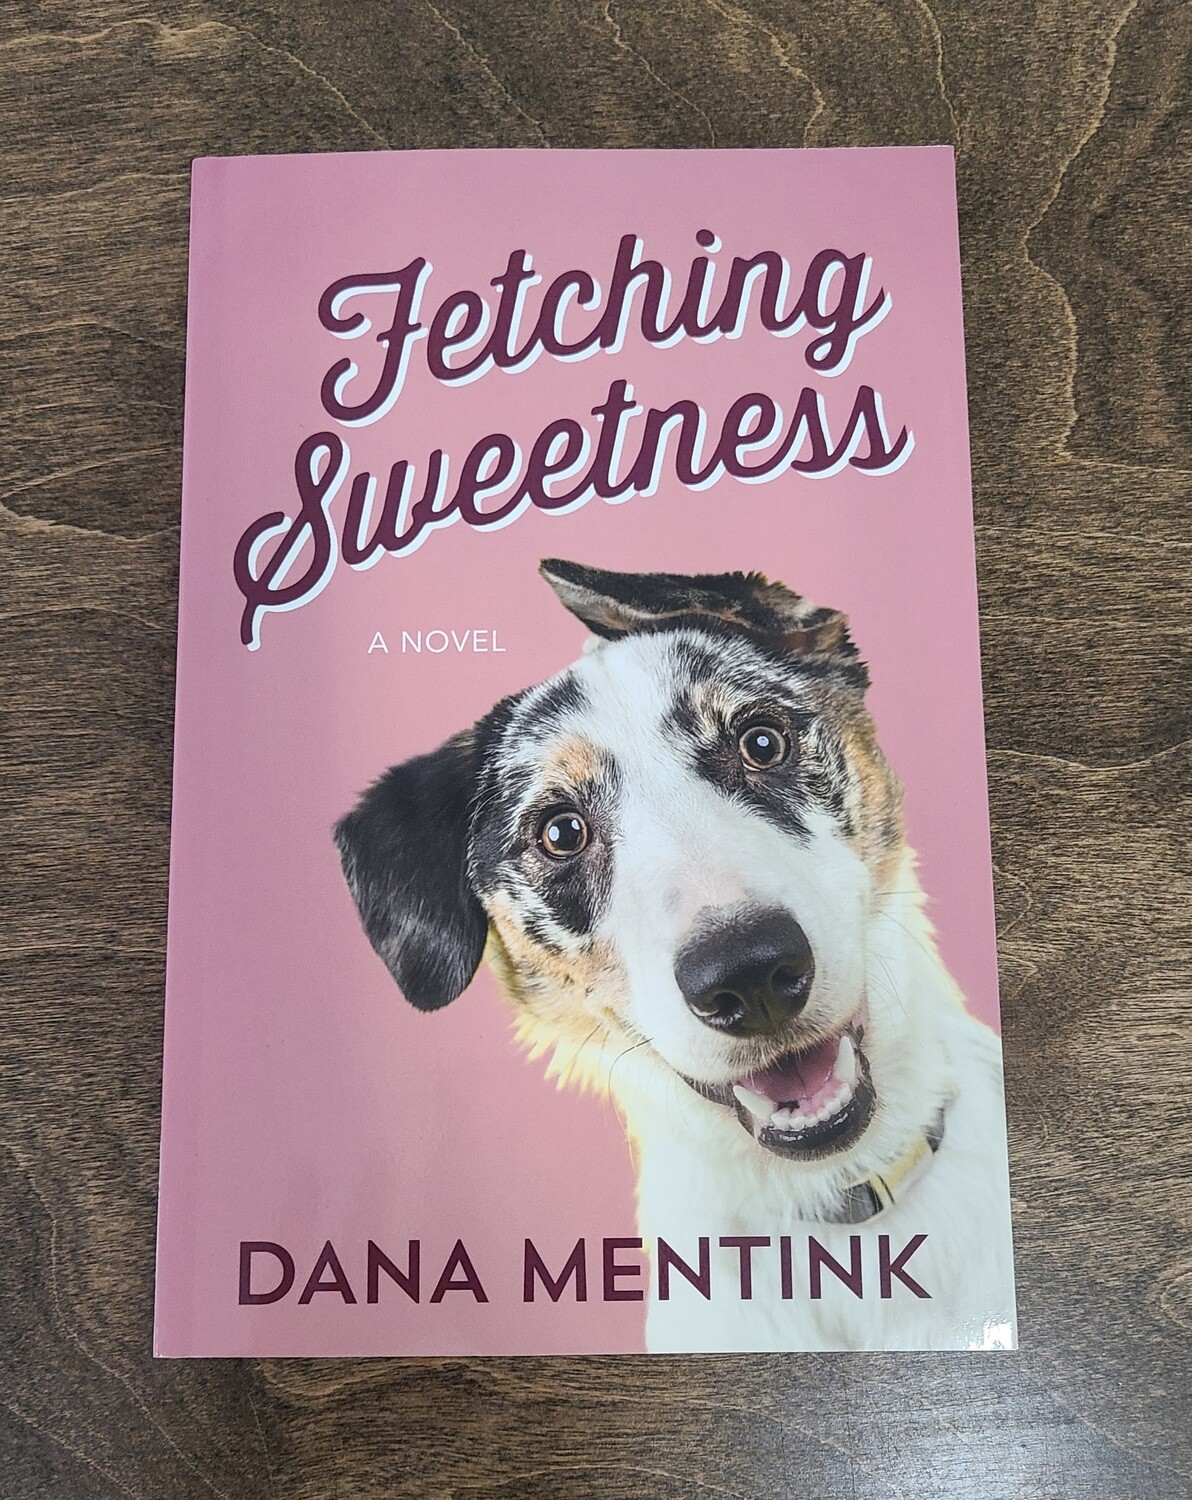 Fetching Sweetness by Dana Mentink